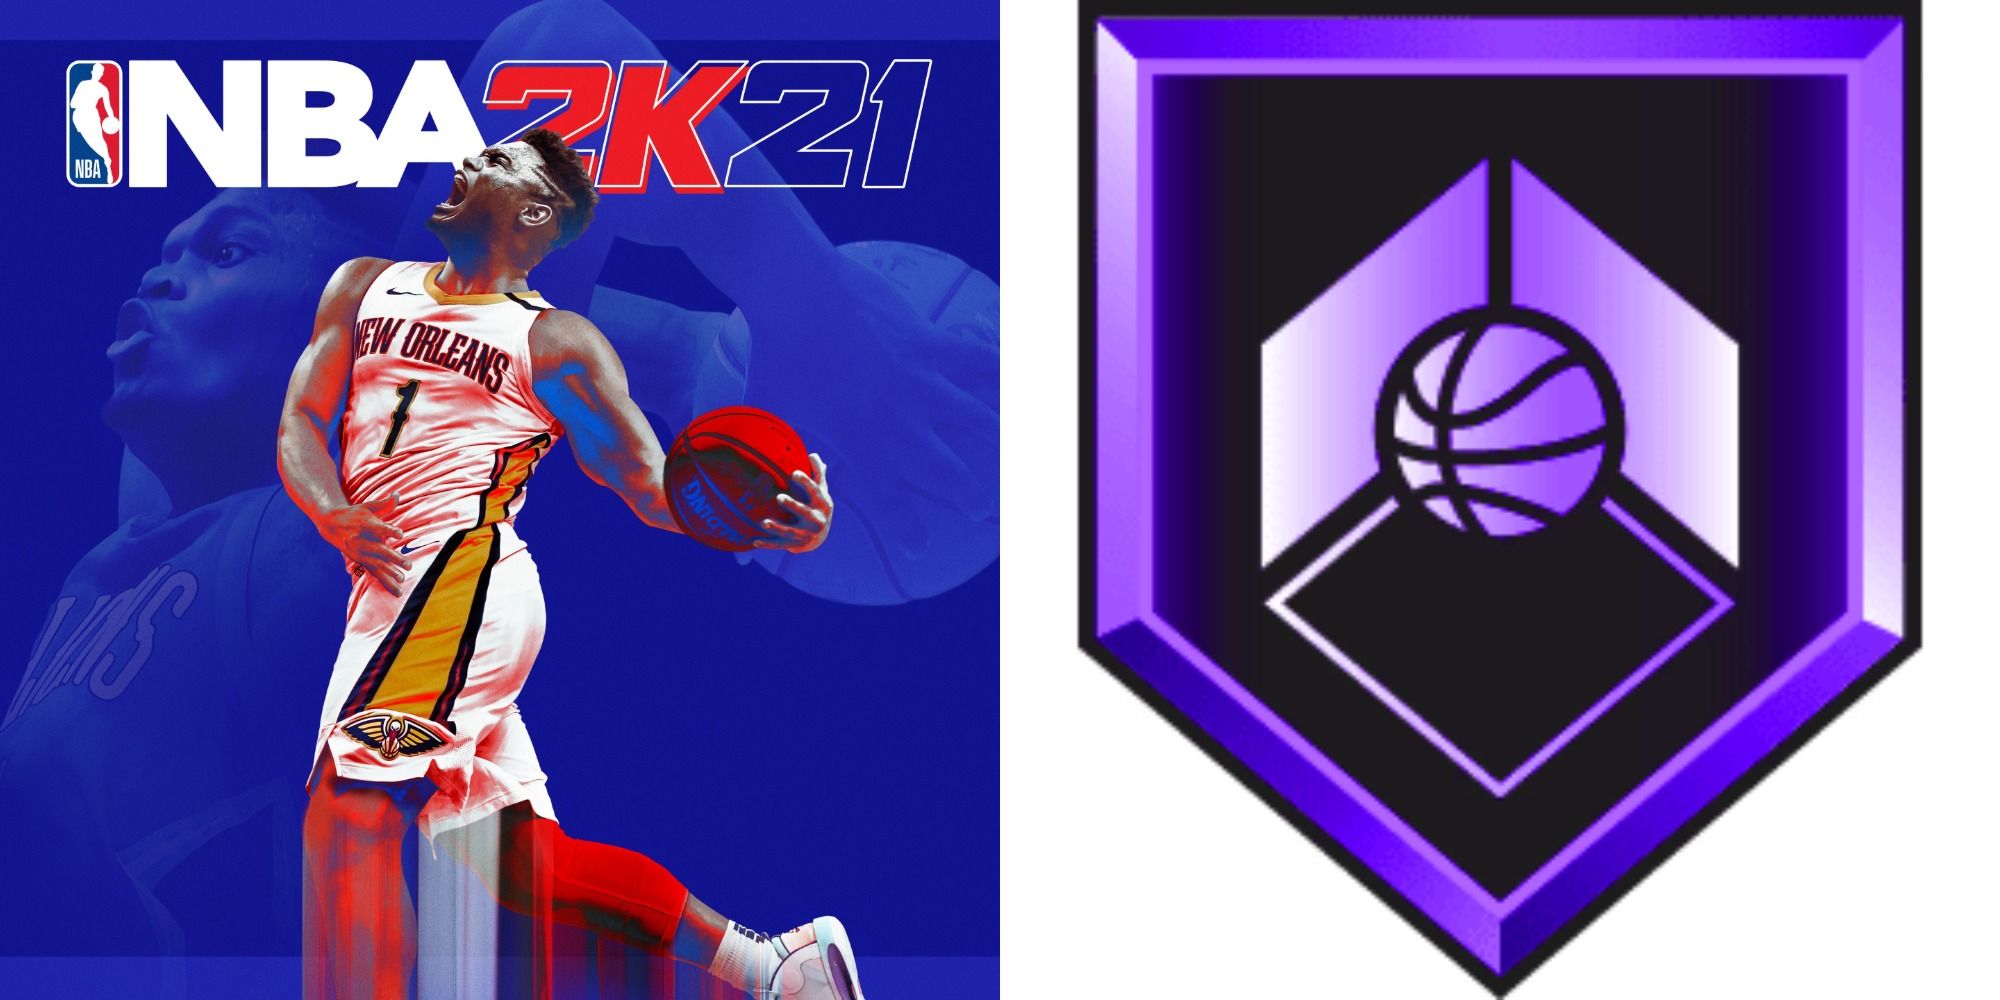 Split image showing the cover of NBA 2K21 and the Corner Specialist Badge